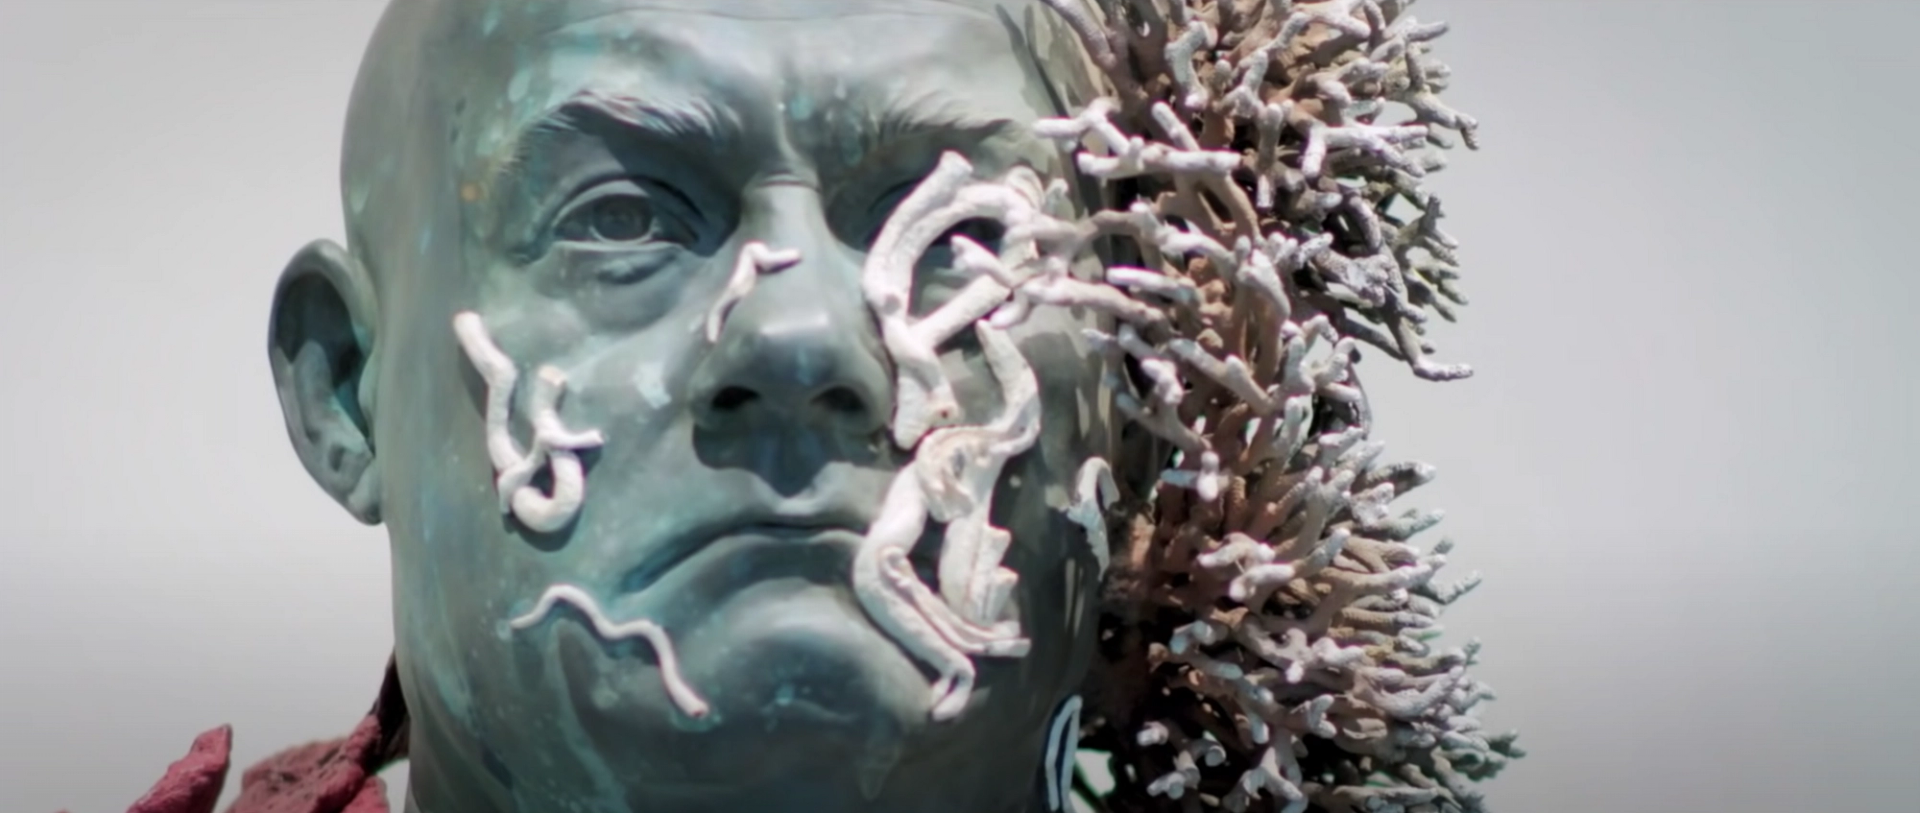 A sculpture of the artist Damein Hirst's face, covered in mock coral.